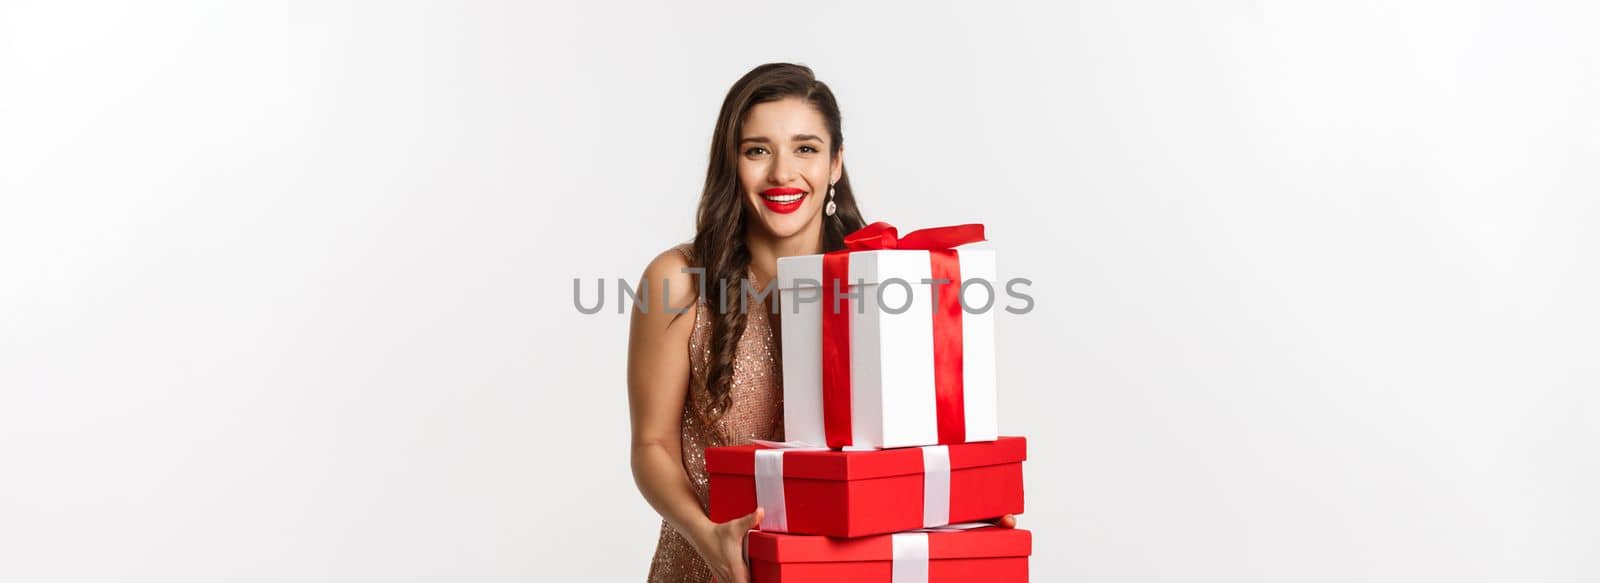 New Year, Christmas and celebration concept. Beautiful woman in party dress, holding gifts and presents, smiling happy, standing over white background.